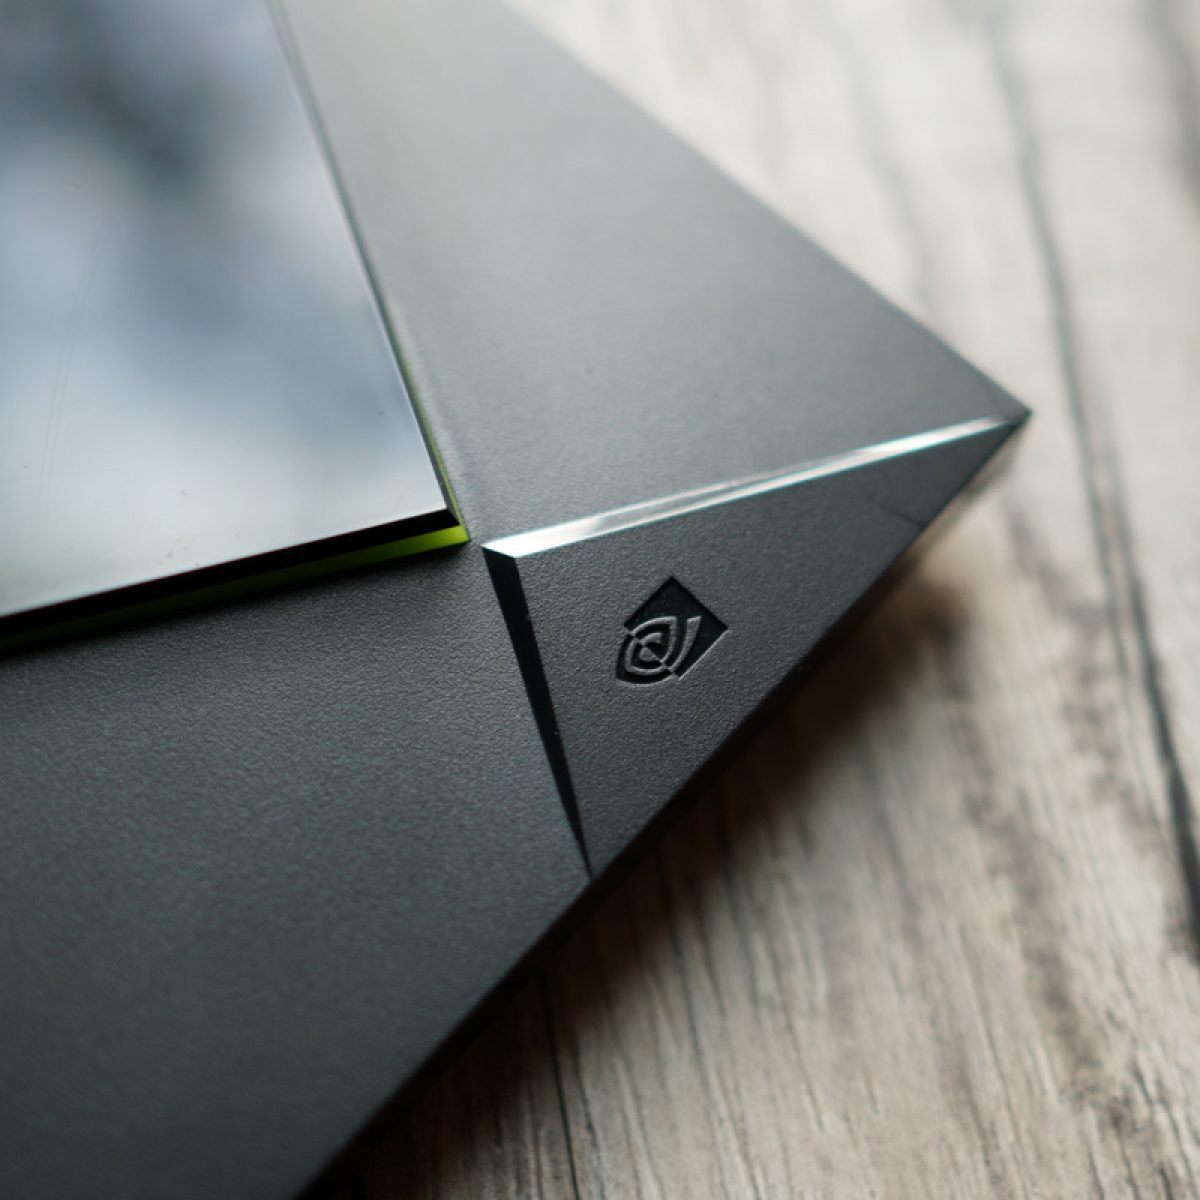 A New NVIDIA SHIELD Android TV Box Showed Up at the FCC!